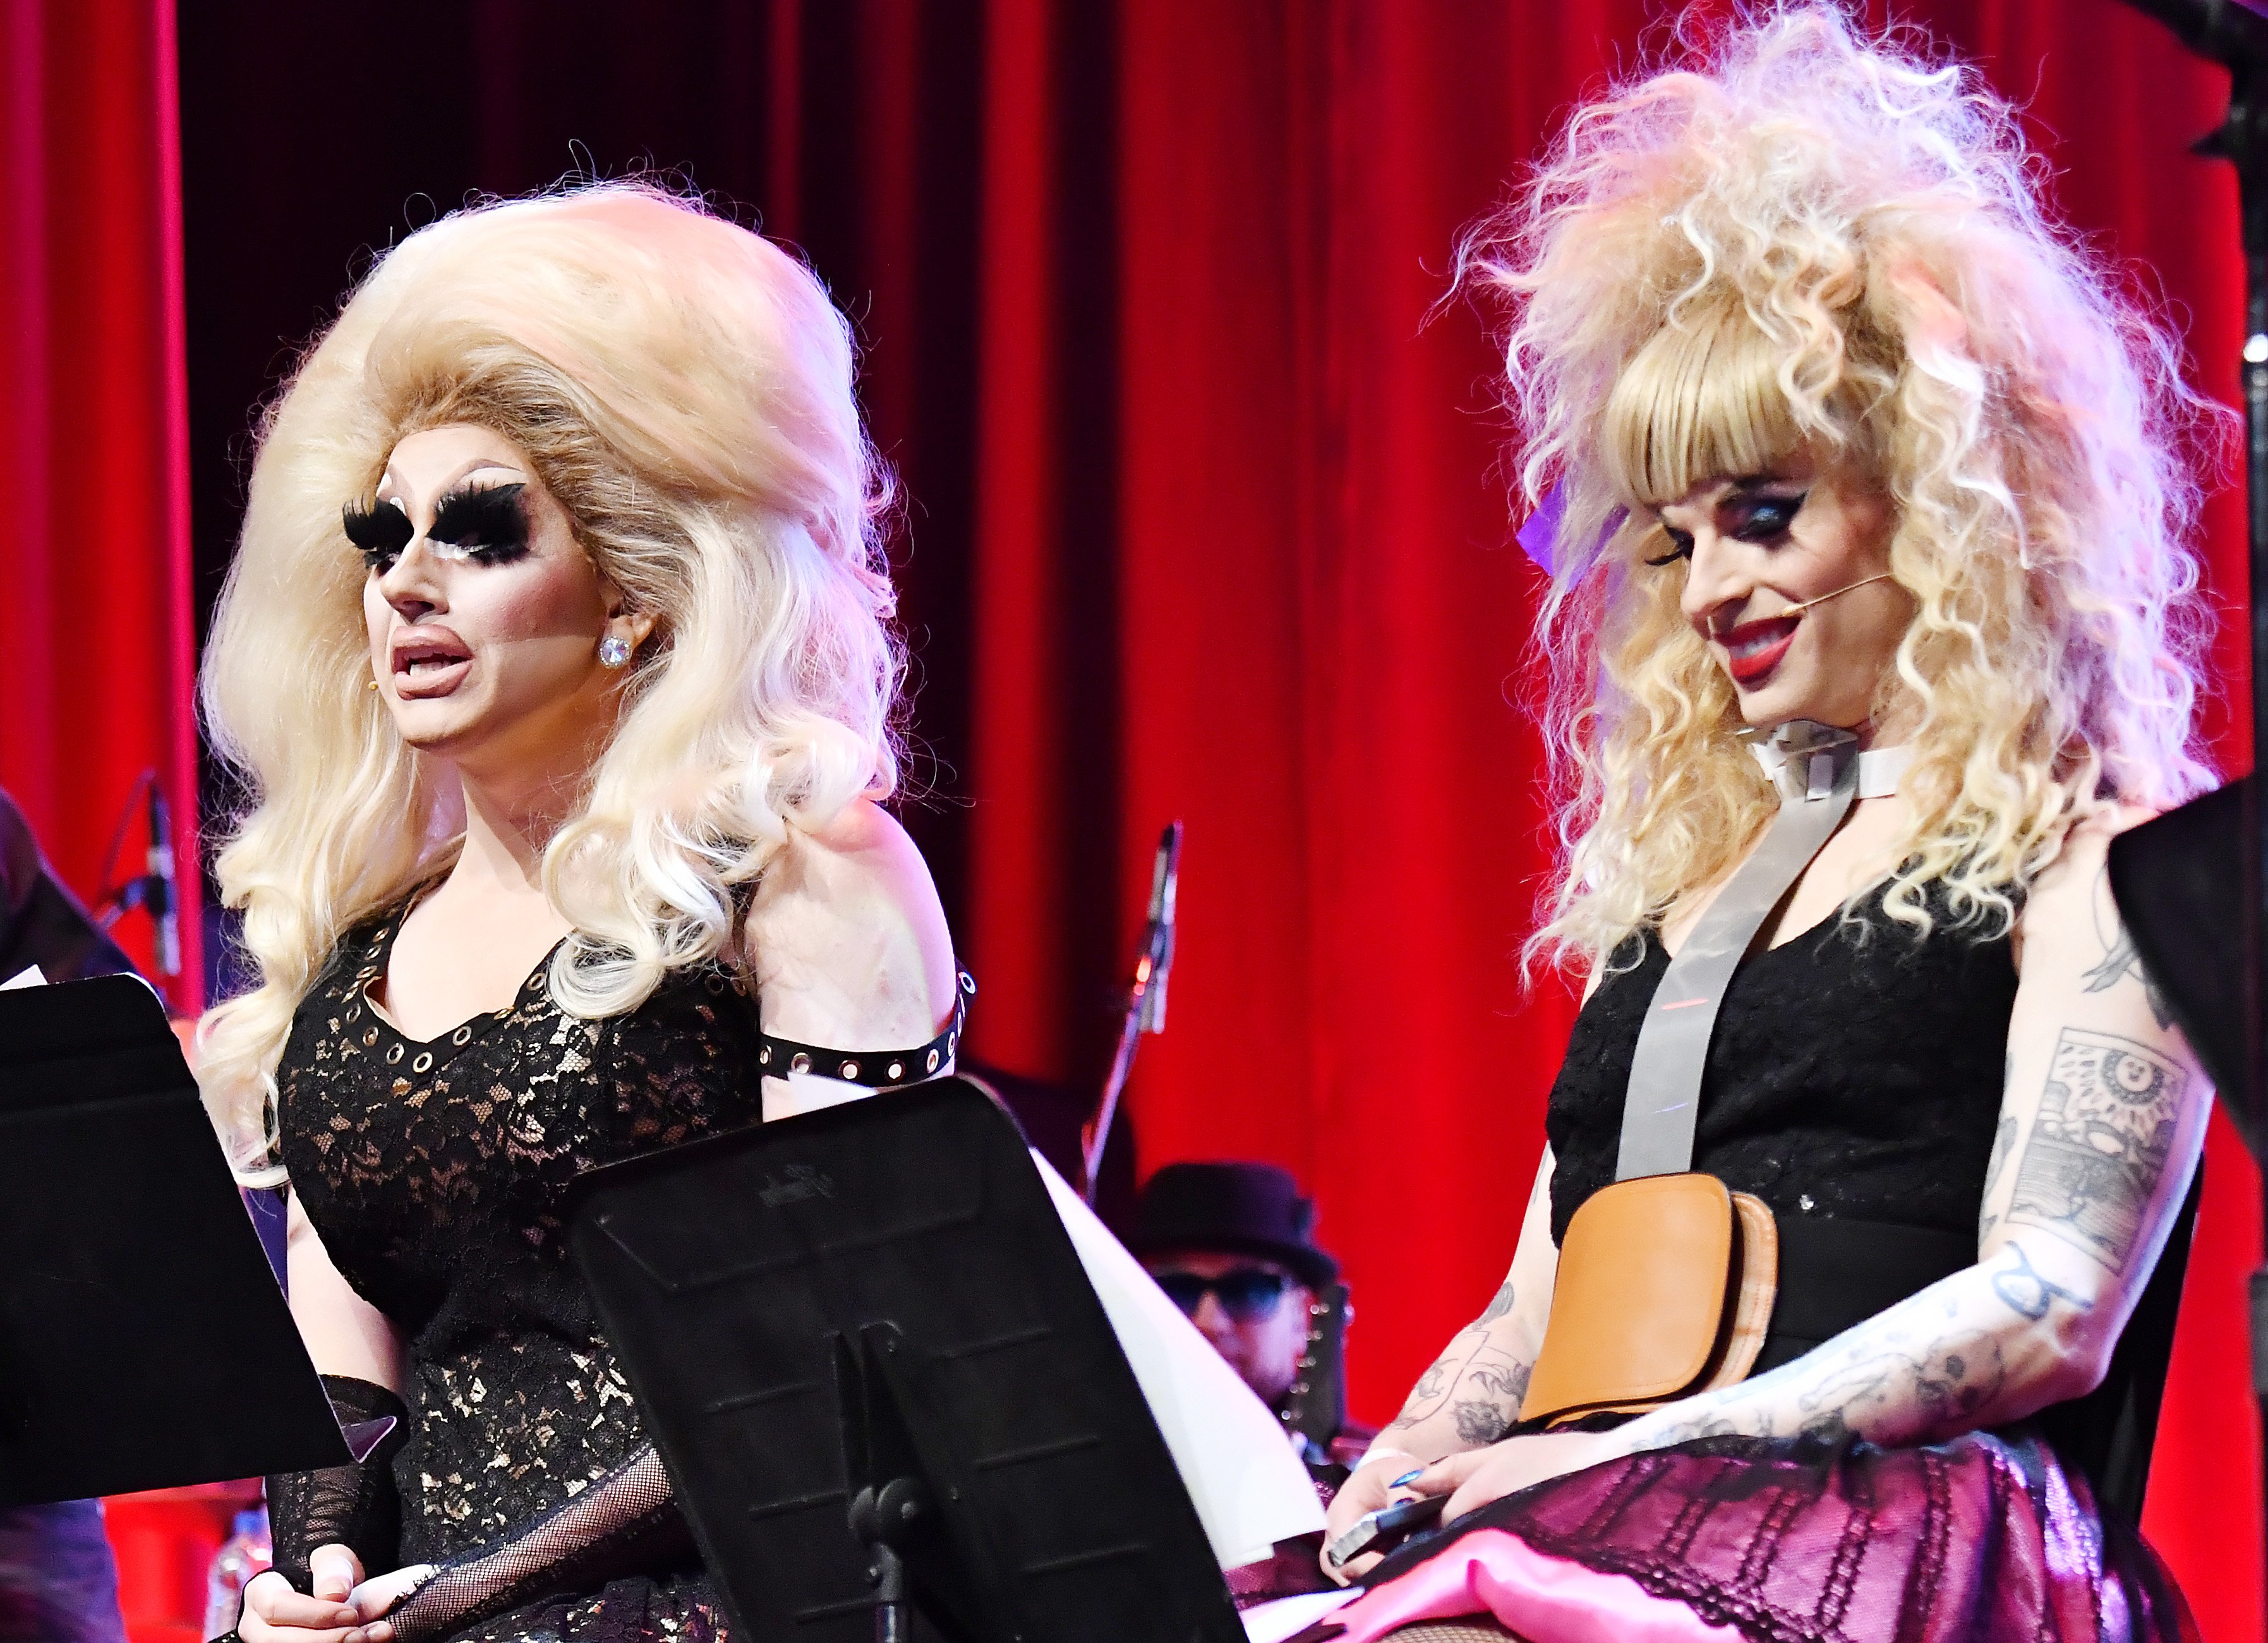 Trixie Mattel and Katya Zamolodchikova perform on stage at the 'Romy & Michele’s High School Reunion: Live' Read